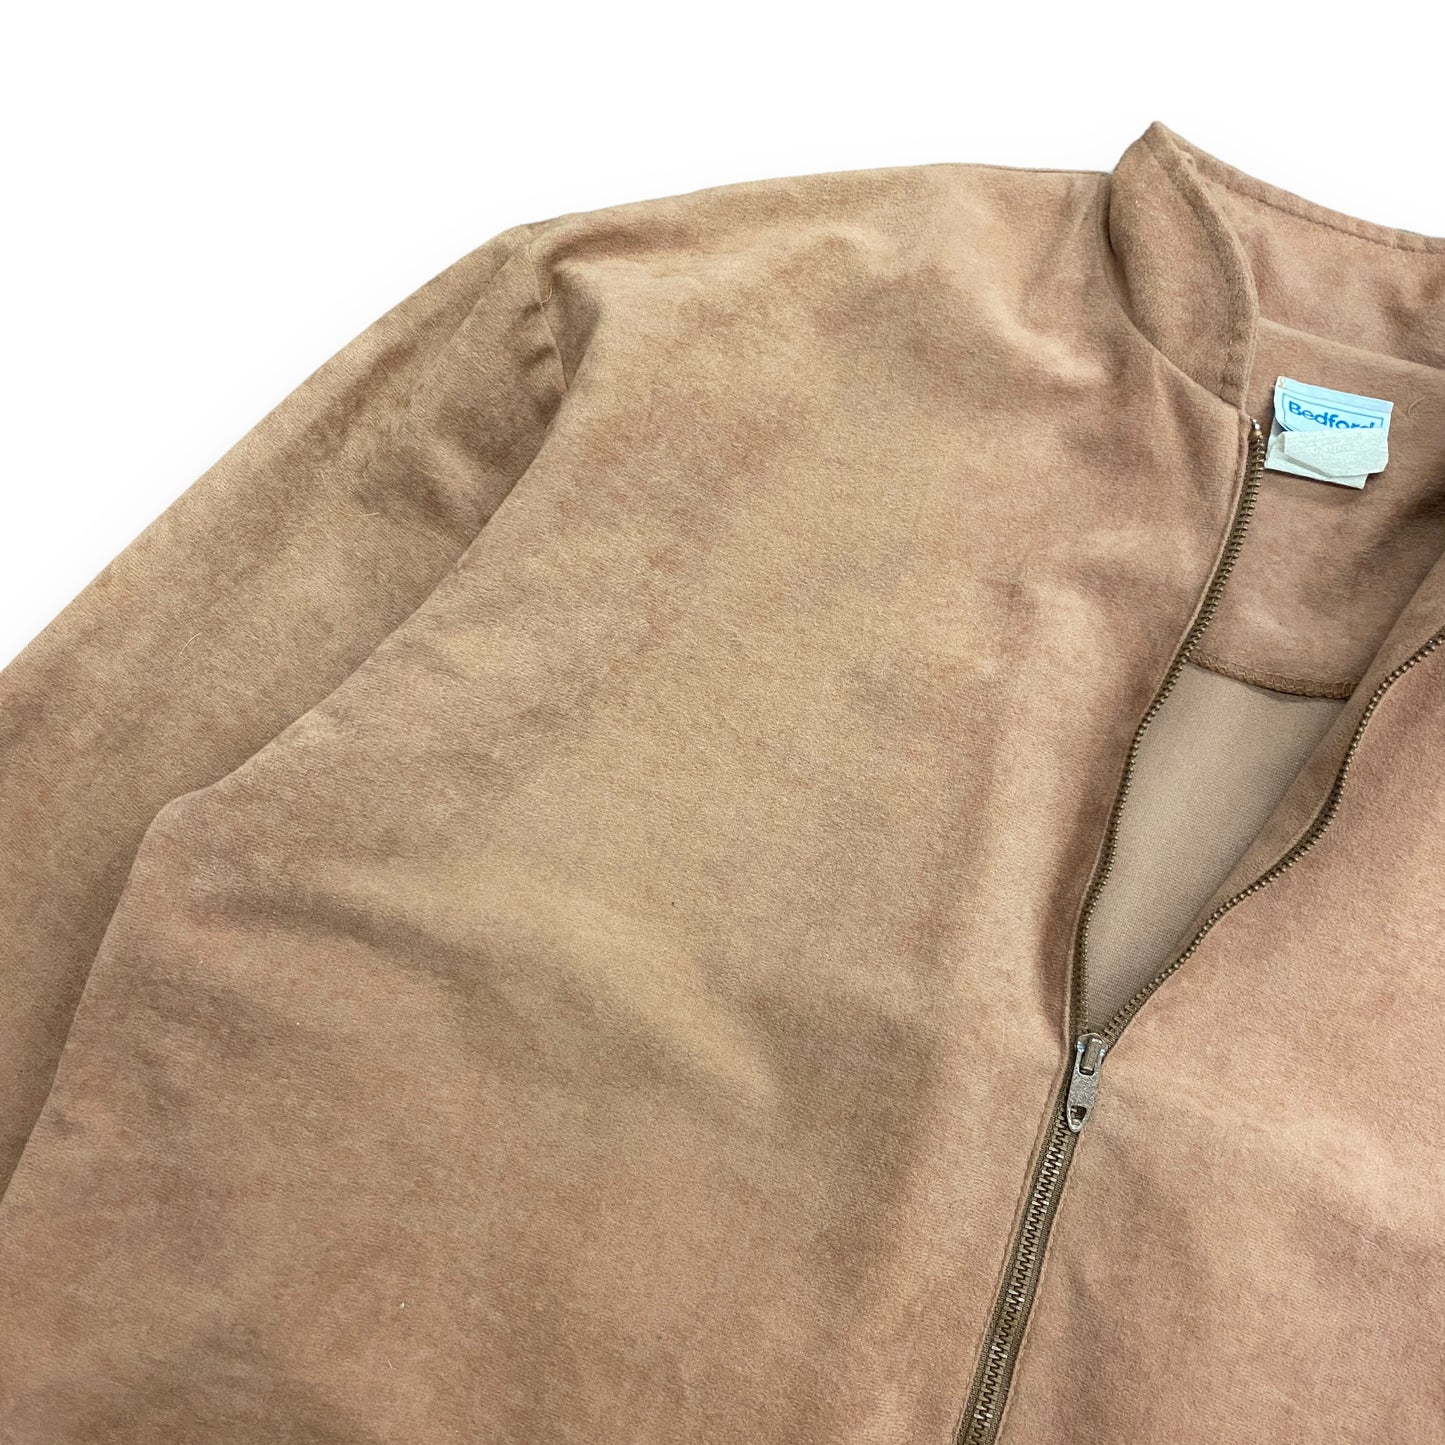 1980s Light Brown Faux Suede Jacket - Size Large